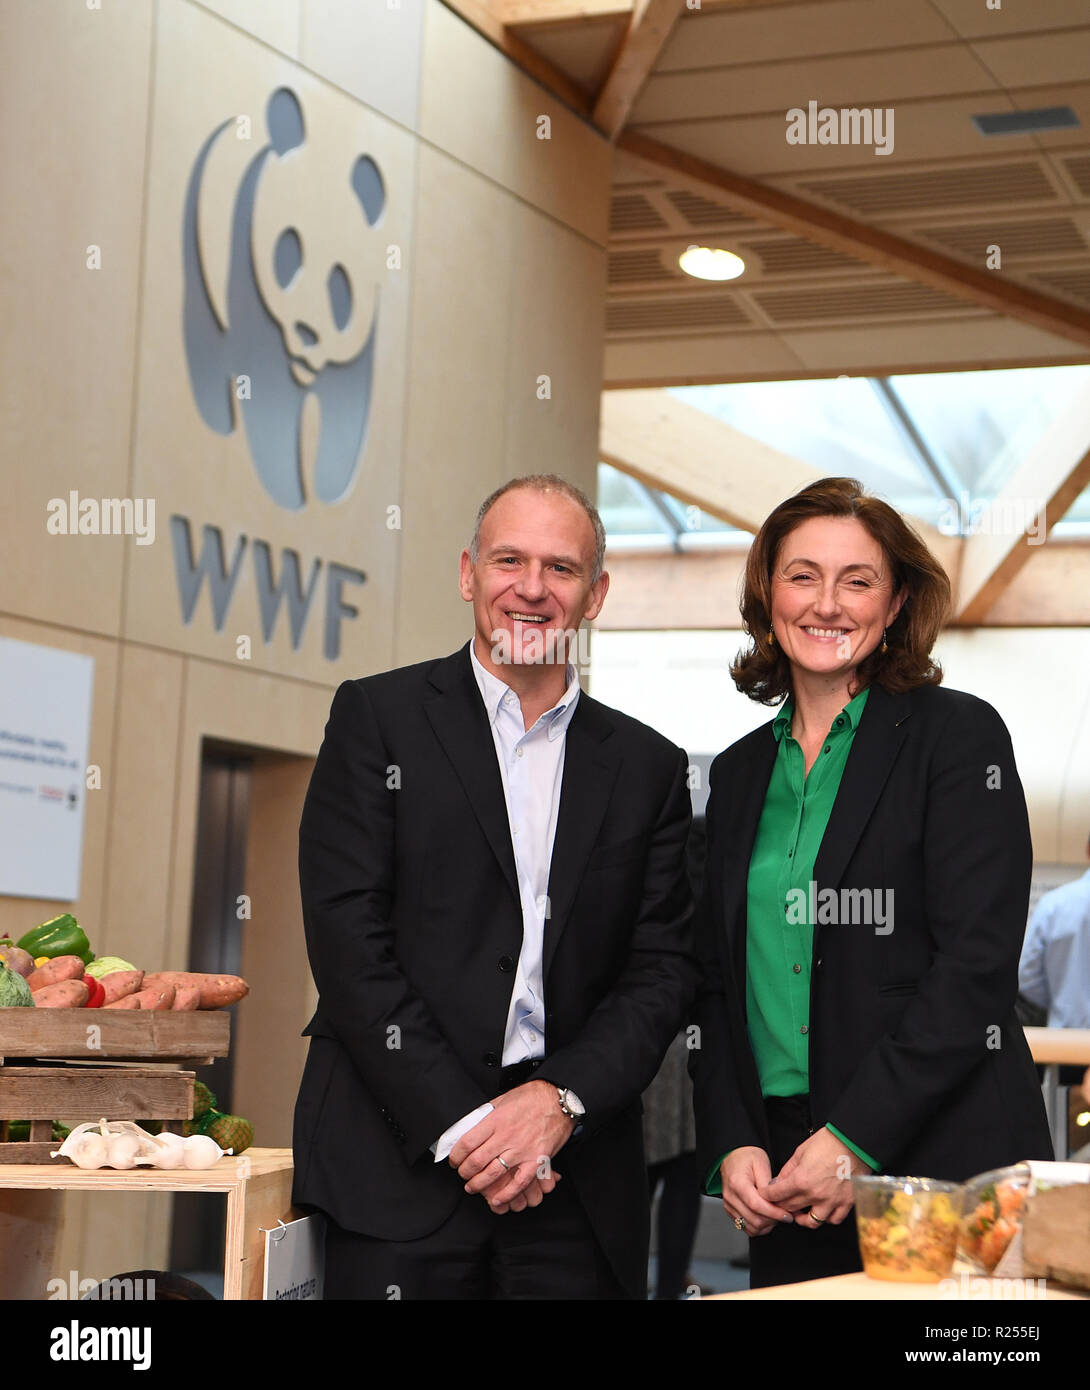 Woking, United Kingdom. 16th Nov 2018. Tesco and WWF new partnership. Dave Lewis, Tesco Group CEO and Tanya Steele, WWF UK CEO at the WWF UK HQ in Woking. Tesco and WWF today announced a ground-breaking, long-term partnership with the aim of reducing the environmental impact of the average UK shopping basket by 50%, improving the sustainability of food while ensuring it remains affordable for all..Picture by Andrew Parsons / Parsons Media Credit: andrew parsons/Alamy Live News Stock Photo